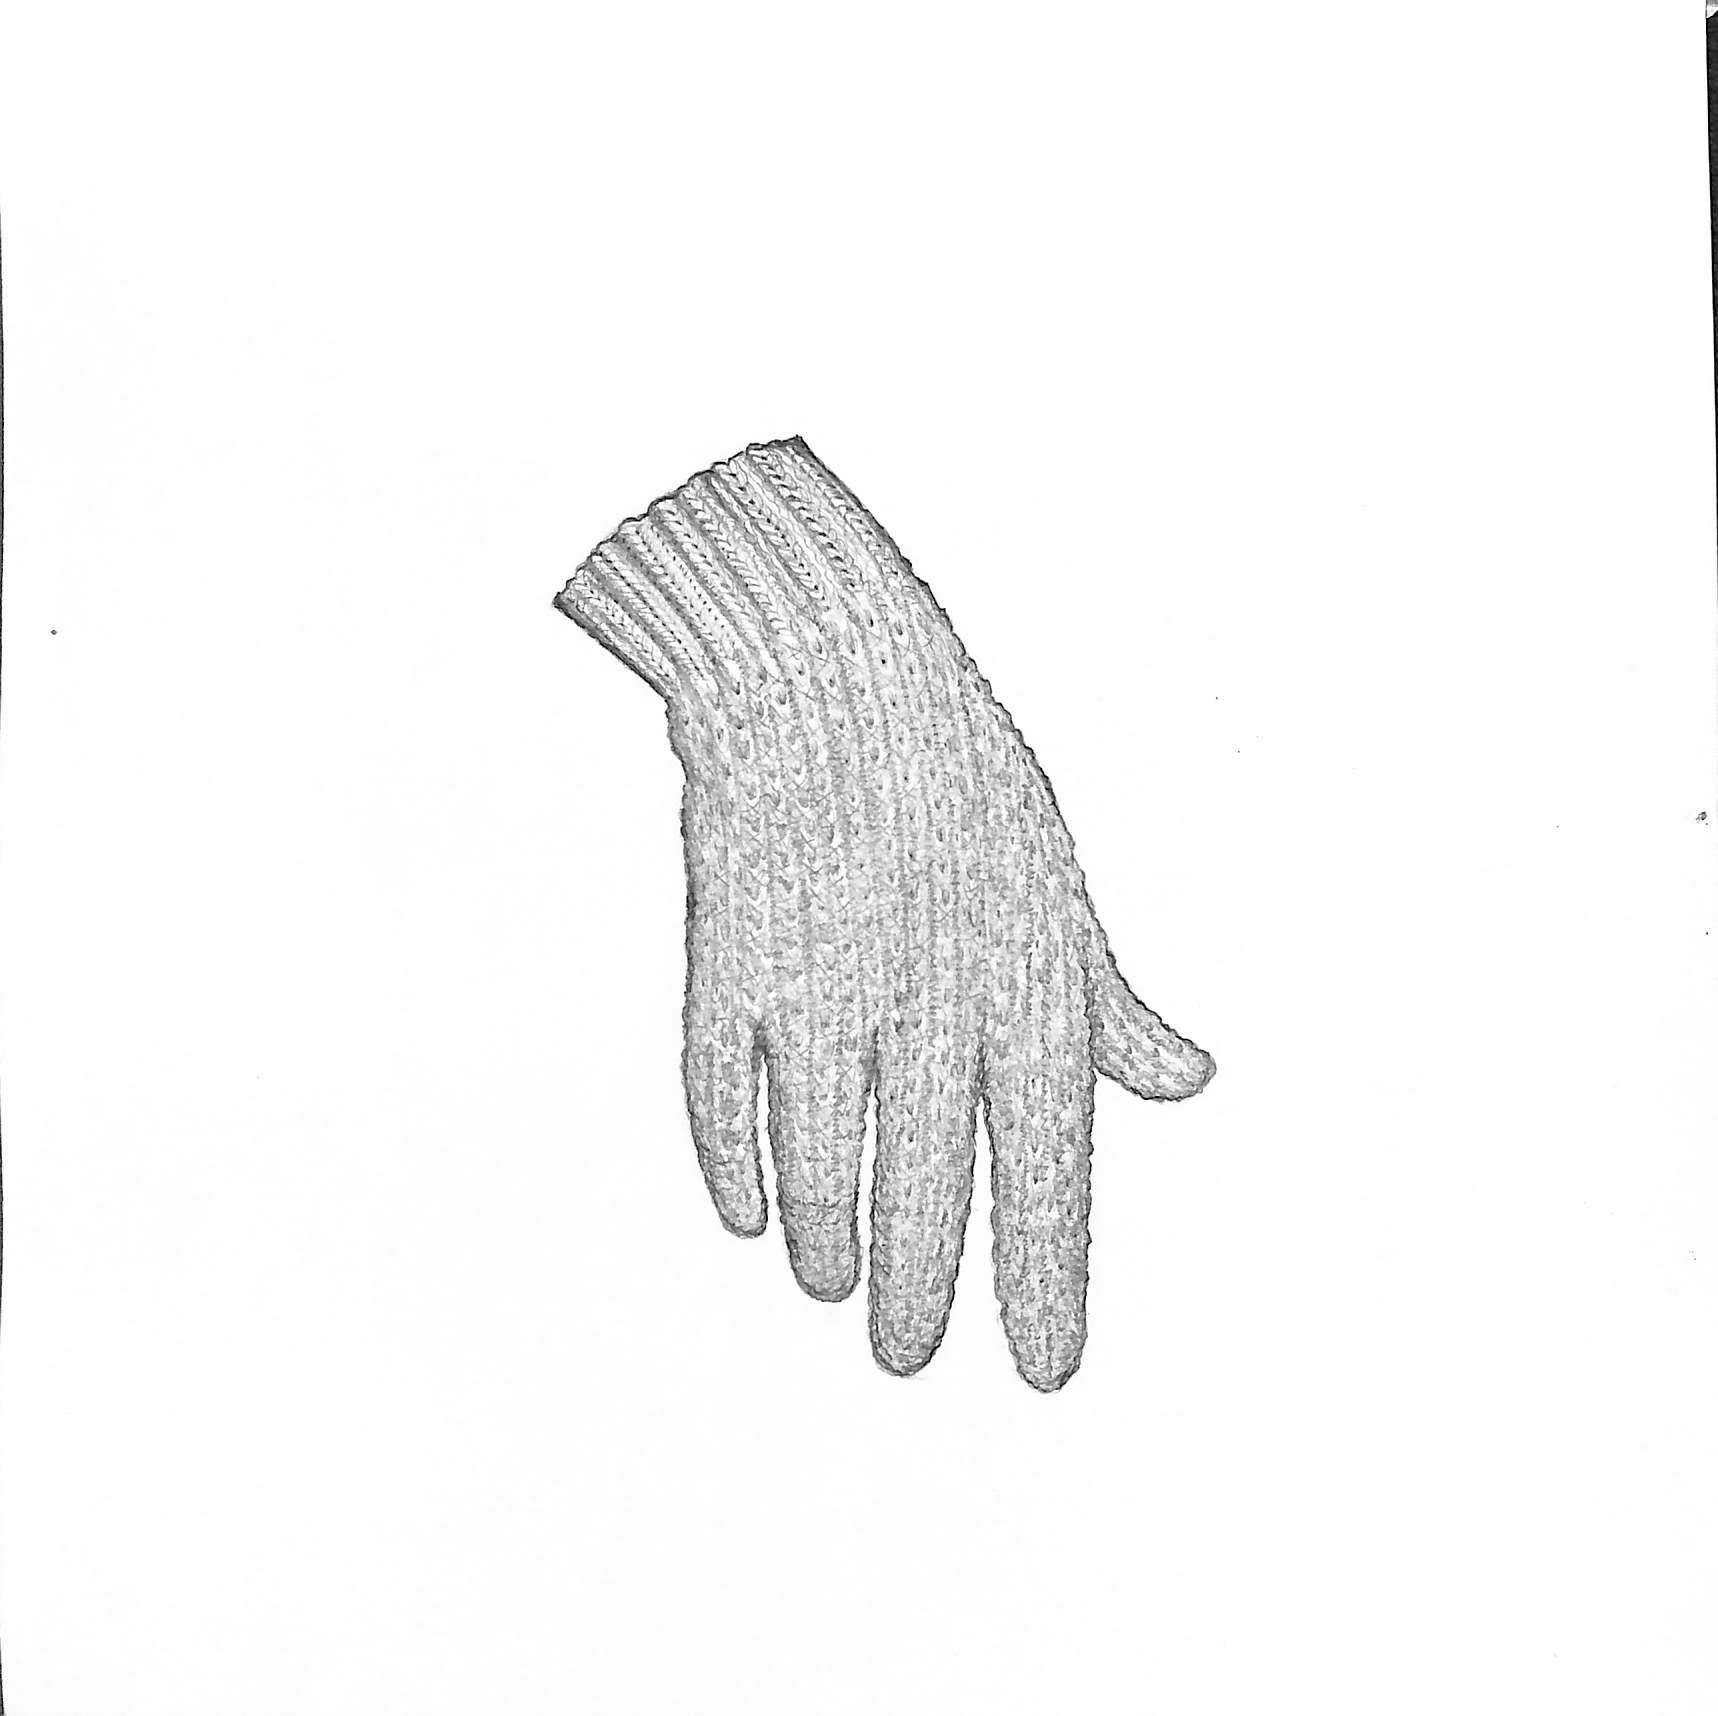 Crocheted Cotton Glove Graphite Drawing - Art by Unknown